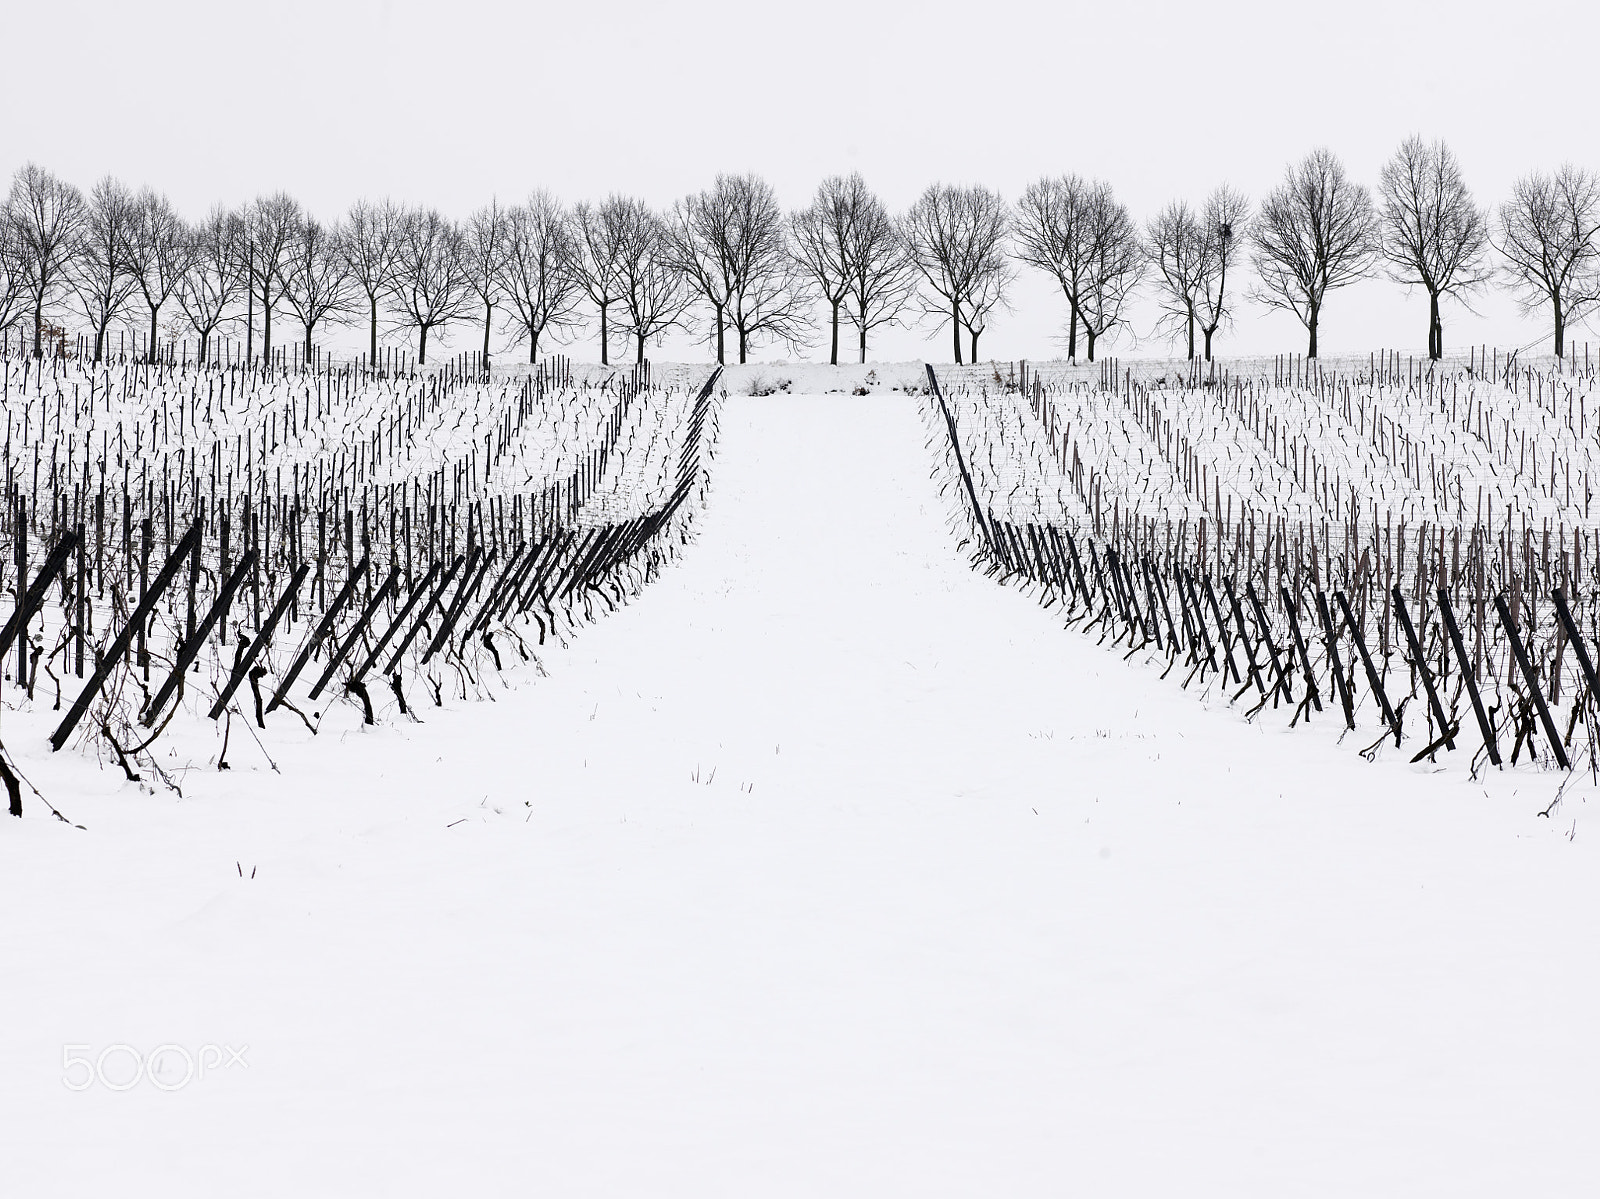 HC 100 sample photo. The two vineyards after the snow photography